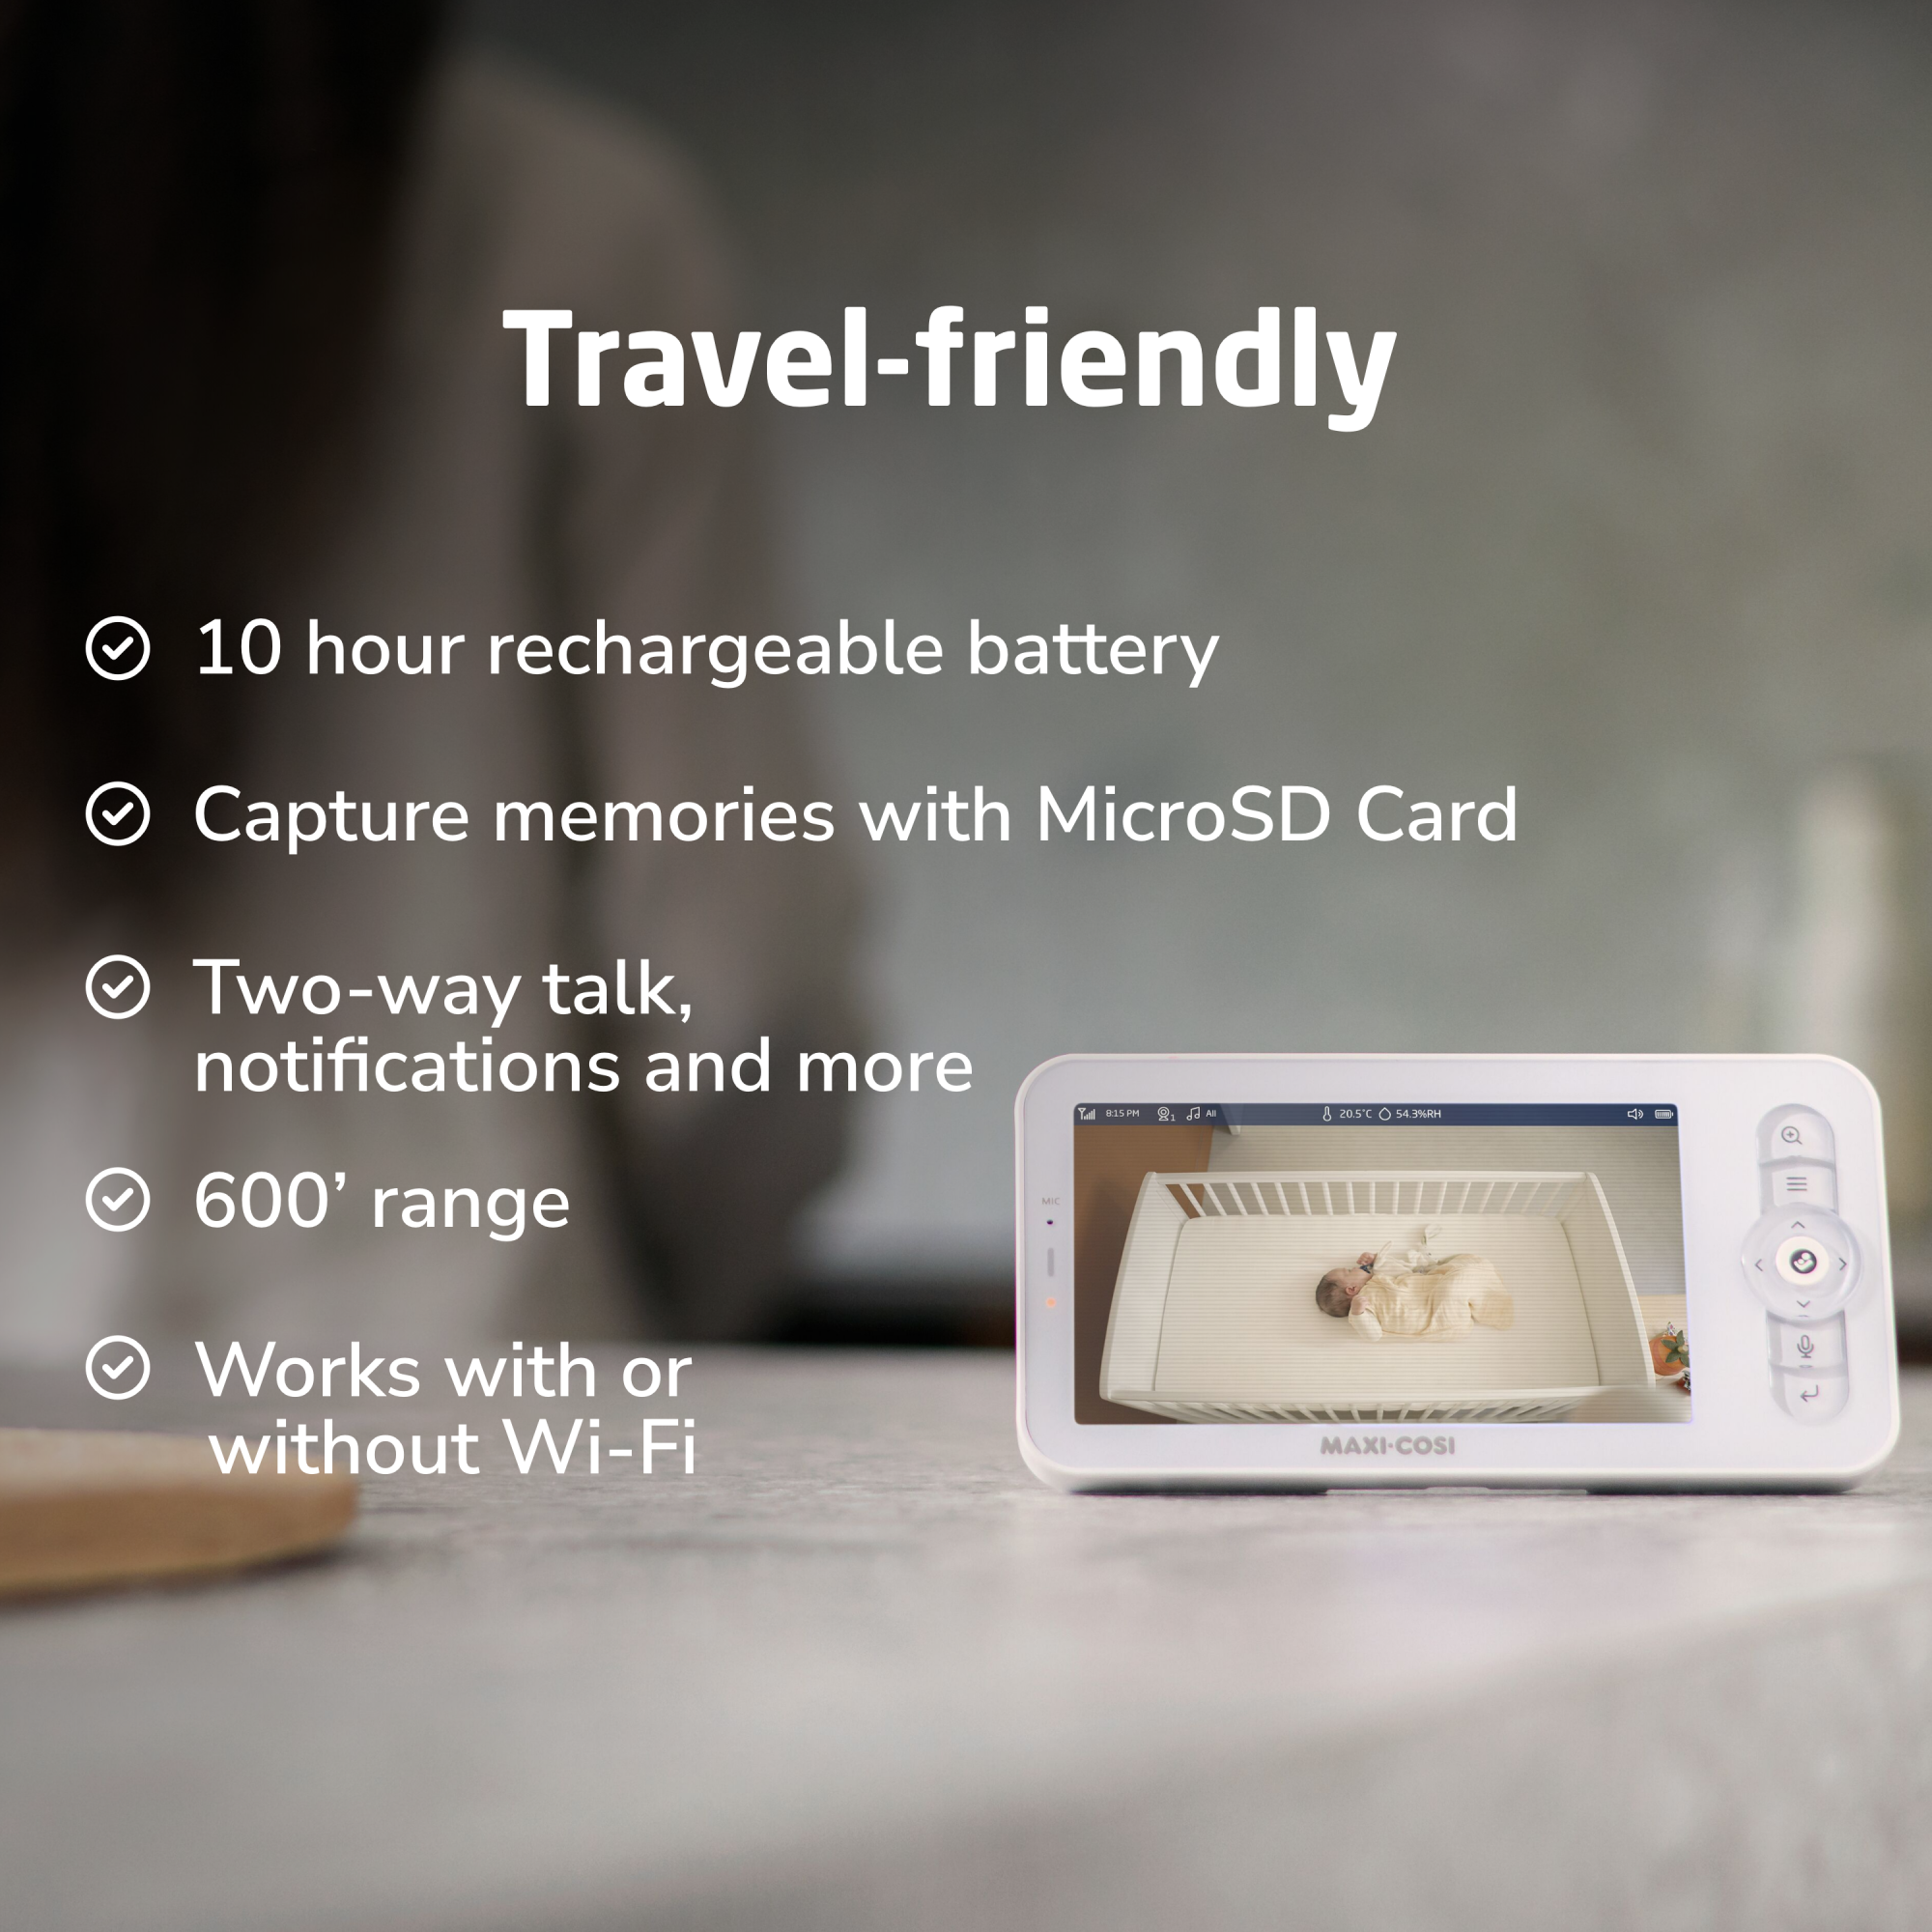 See Pro 360° Baby Monitor - Travel-friendly: 10 hour rechargeable battery, Capture memories with MicroSD Card, Two-way talk, notifications and more, 600' range, Works with or without Wi-Fi